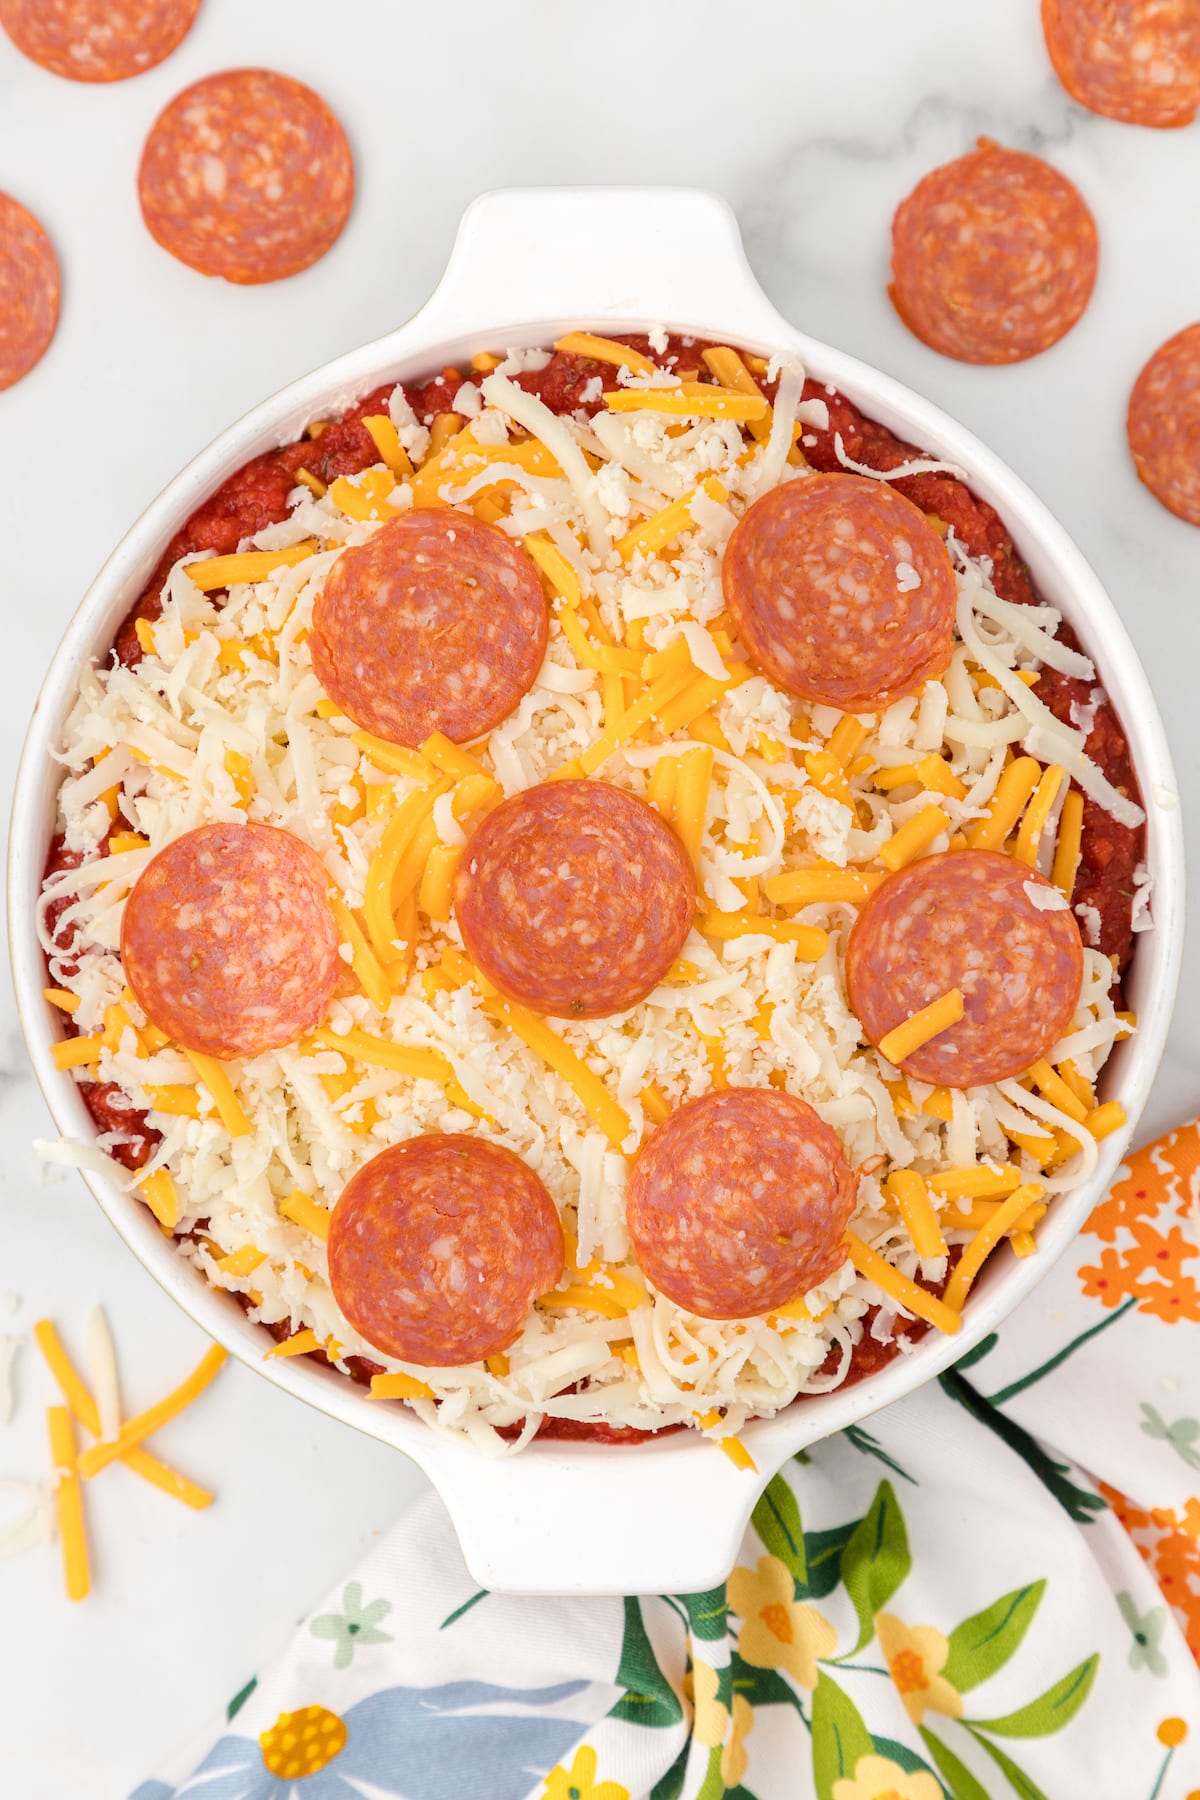 Top the pizza sauce with additional shredded cheese and pepperoni